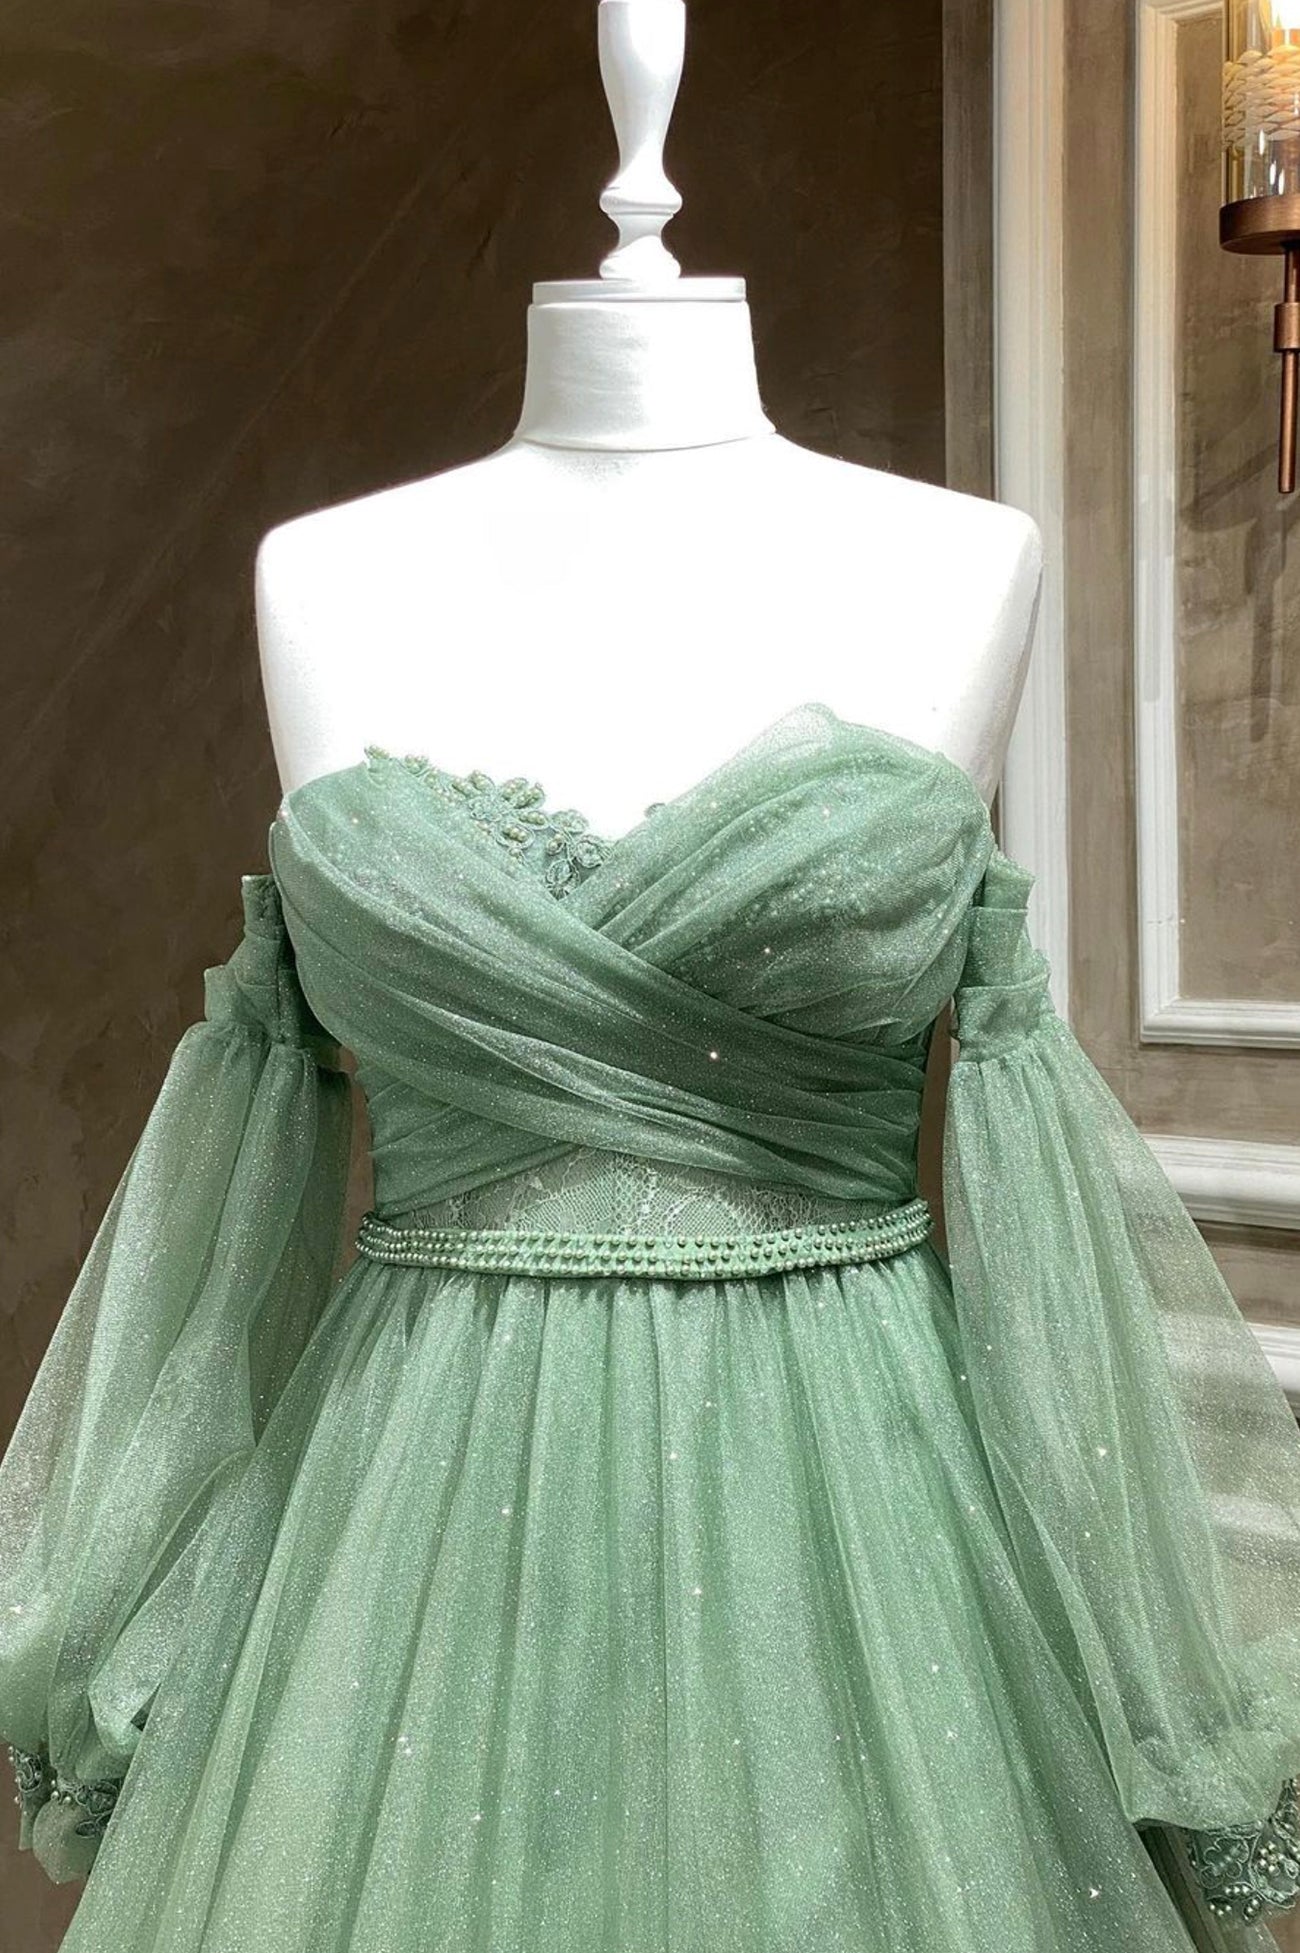 Party Dresses For Teens, Green Strapless Tulle Long Sleeve Prom Dress, Green A-Line Evening Party Dress